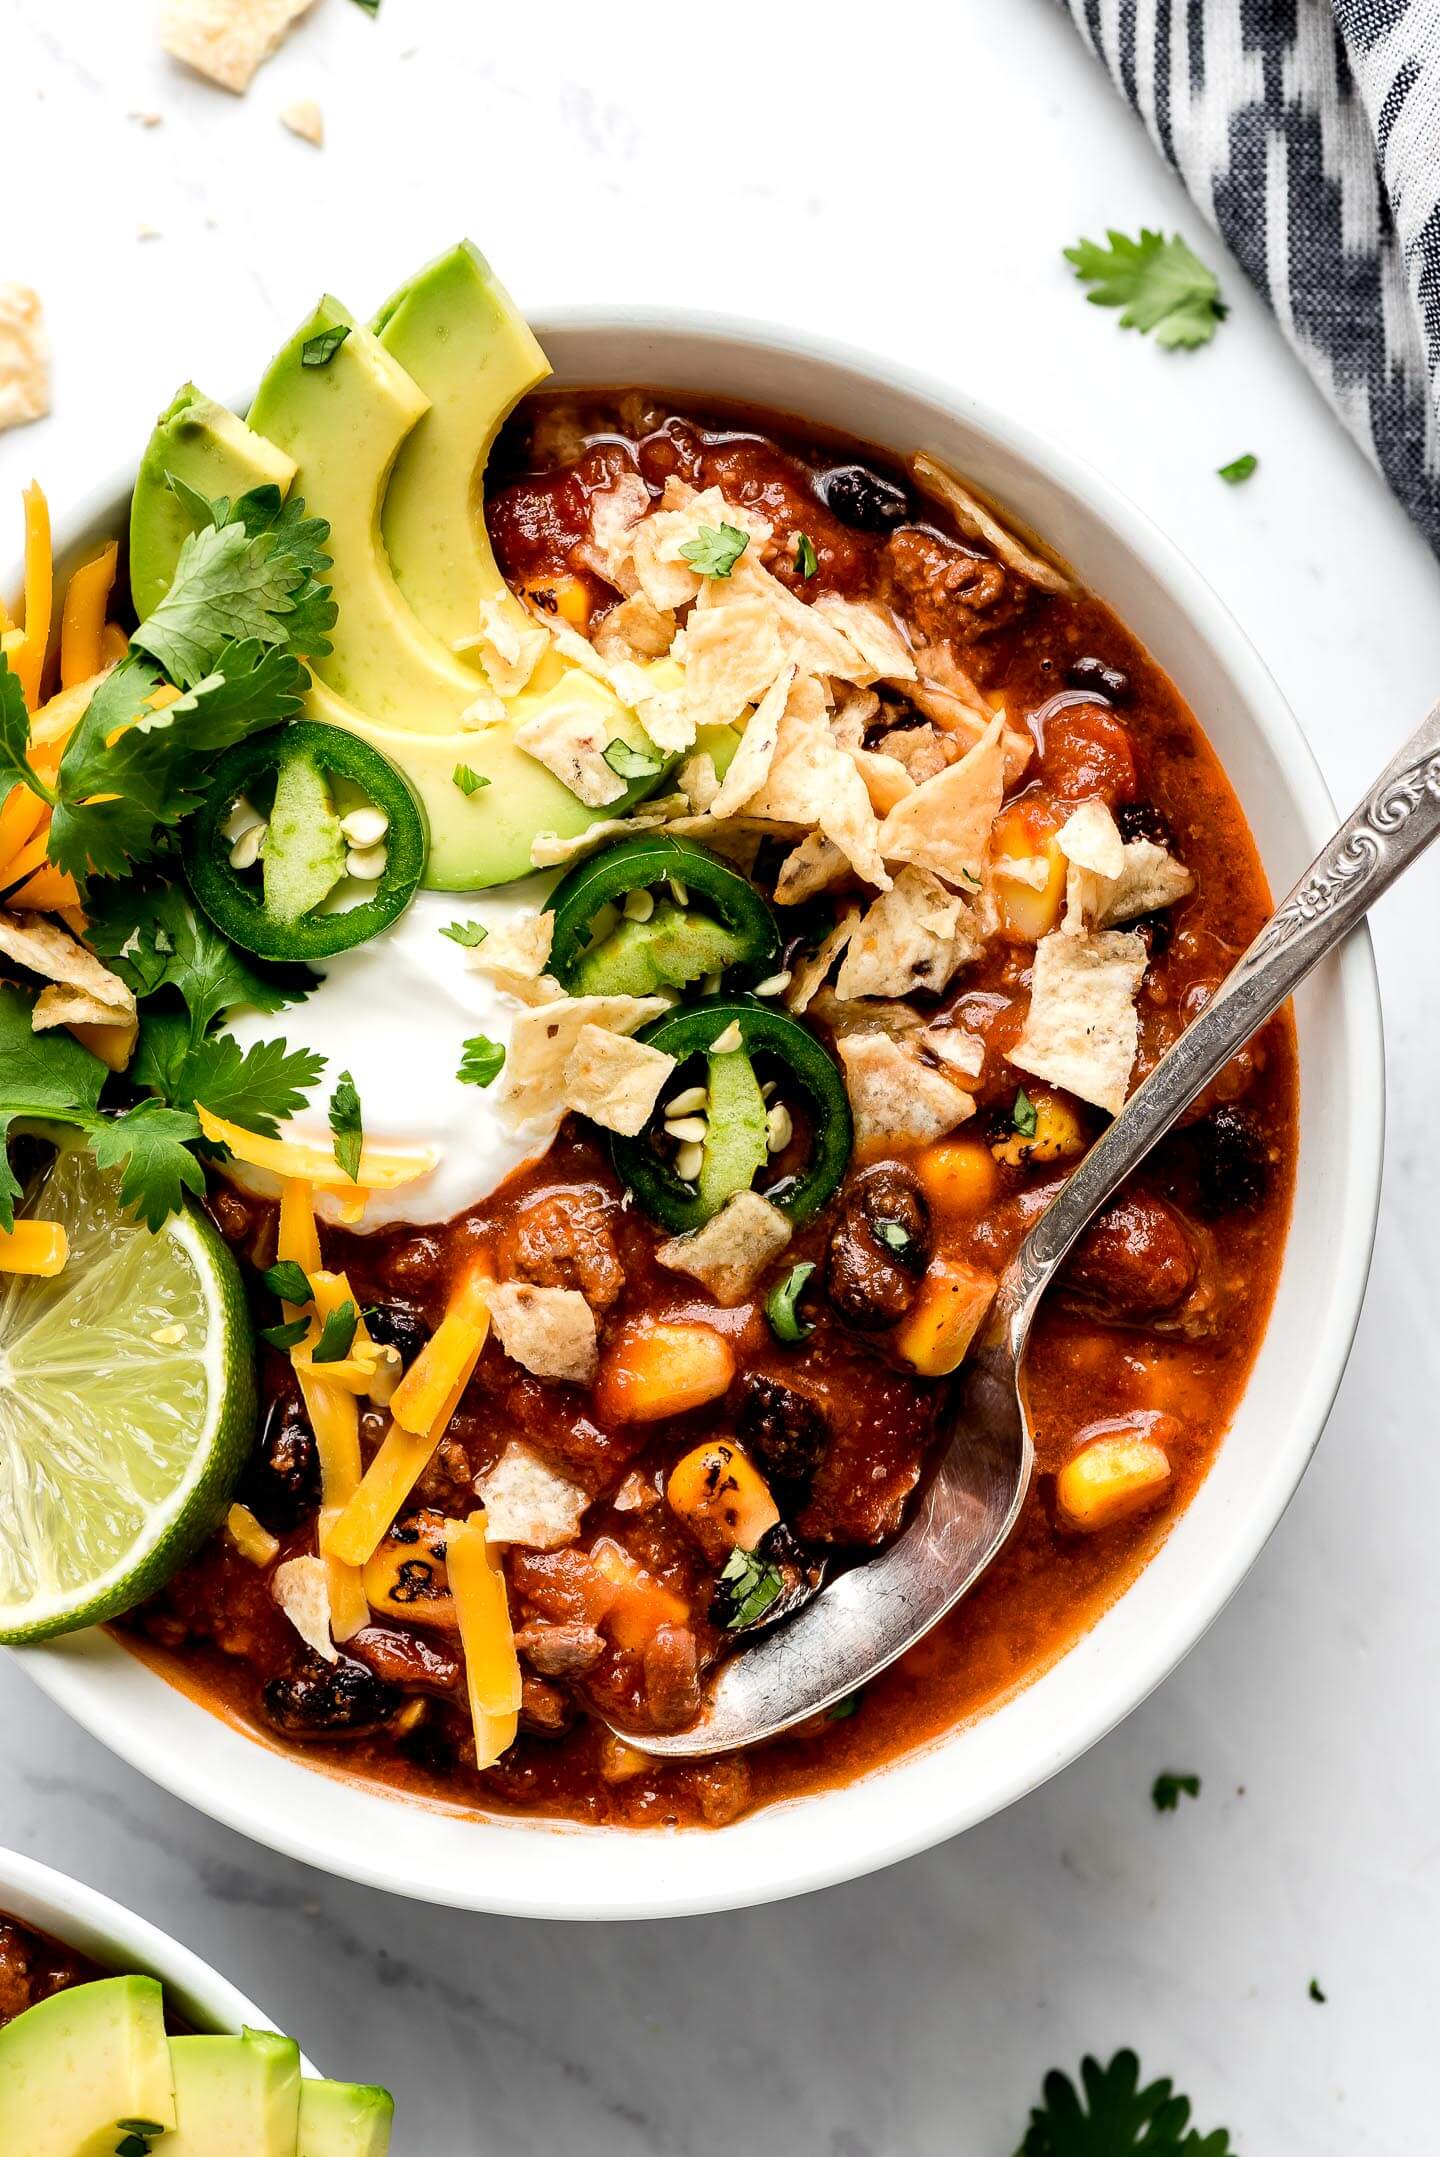 Slow Cooker Taco Soup Recipe - Home. Made. Interest.